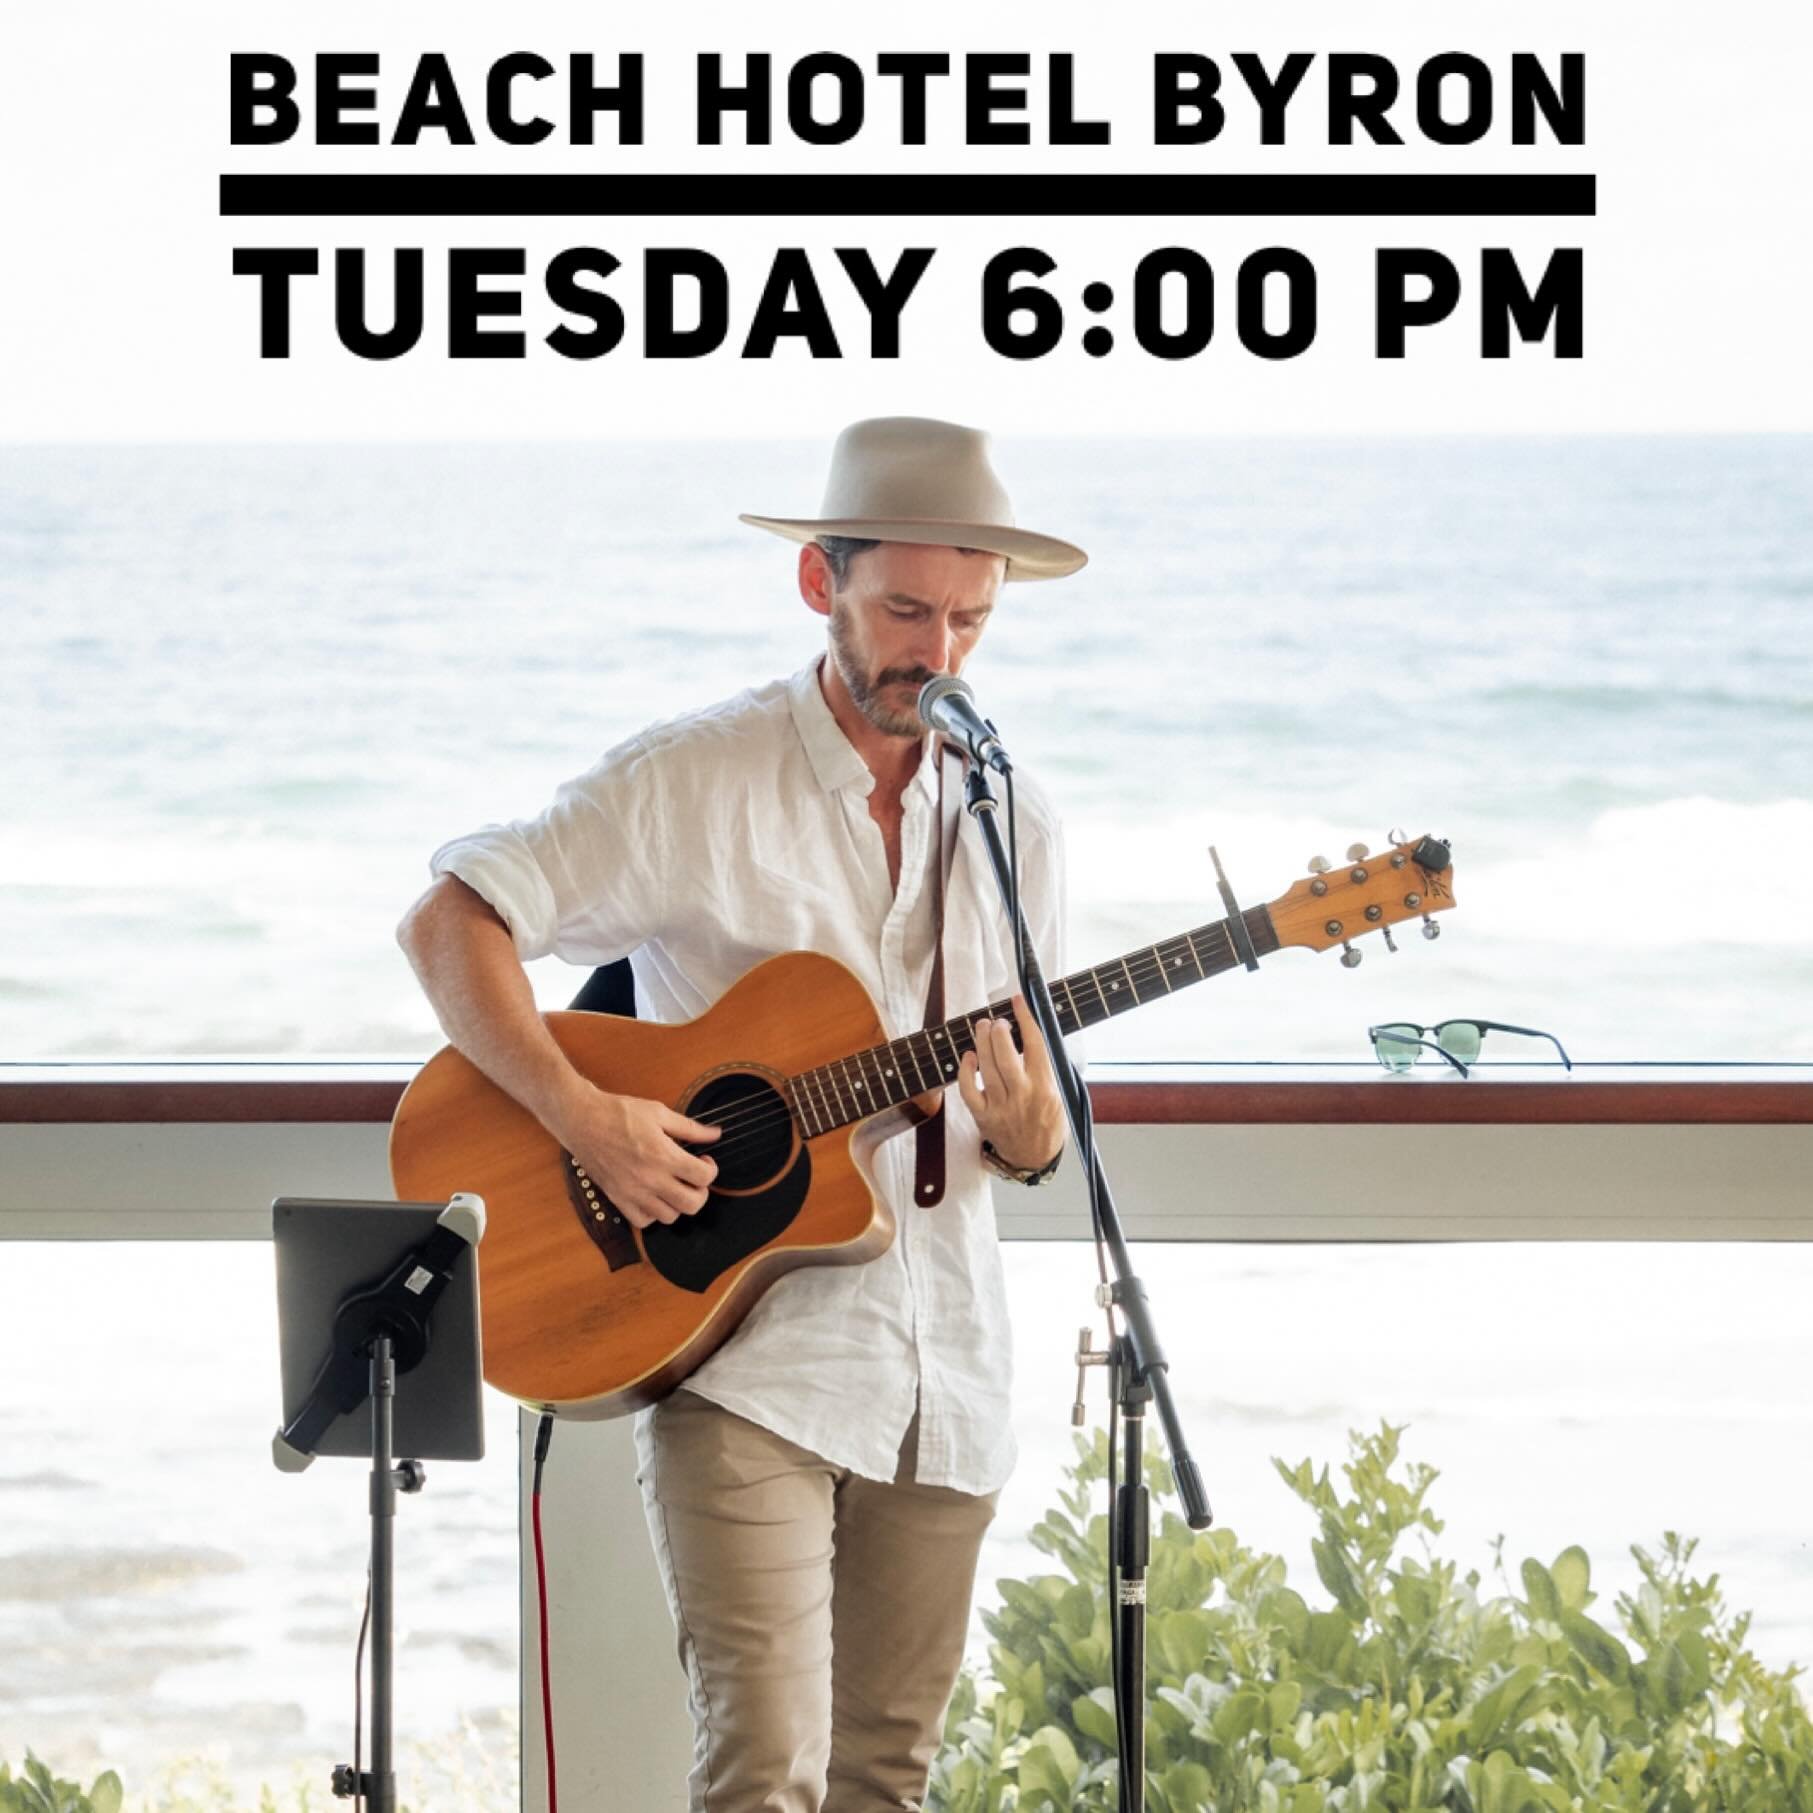 Come and join me at the iconic @beachhotelbyronbay this Tuesday night from 6:00pm for some live music and Byron vibes 🎼✨